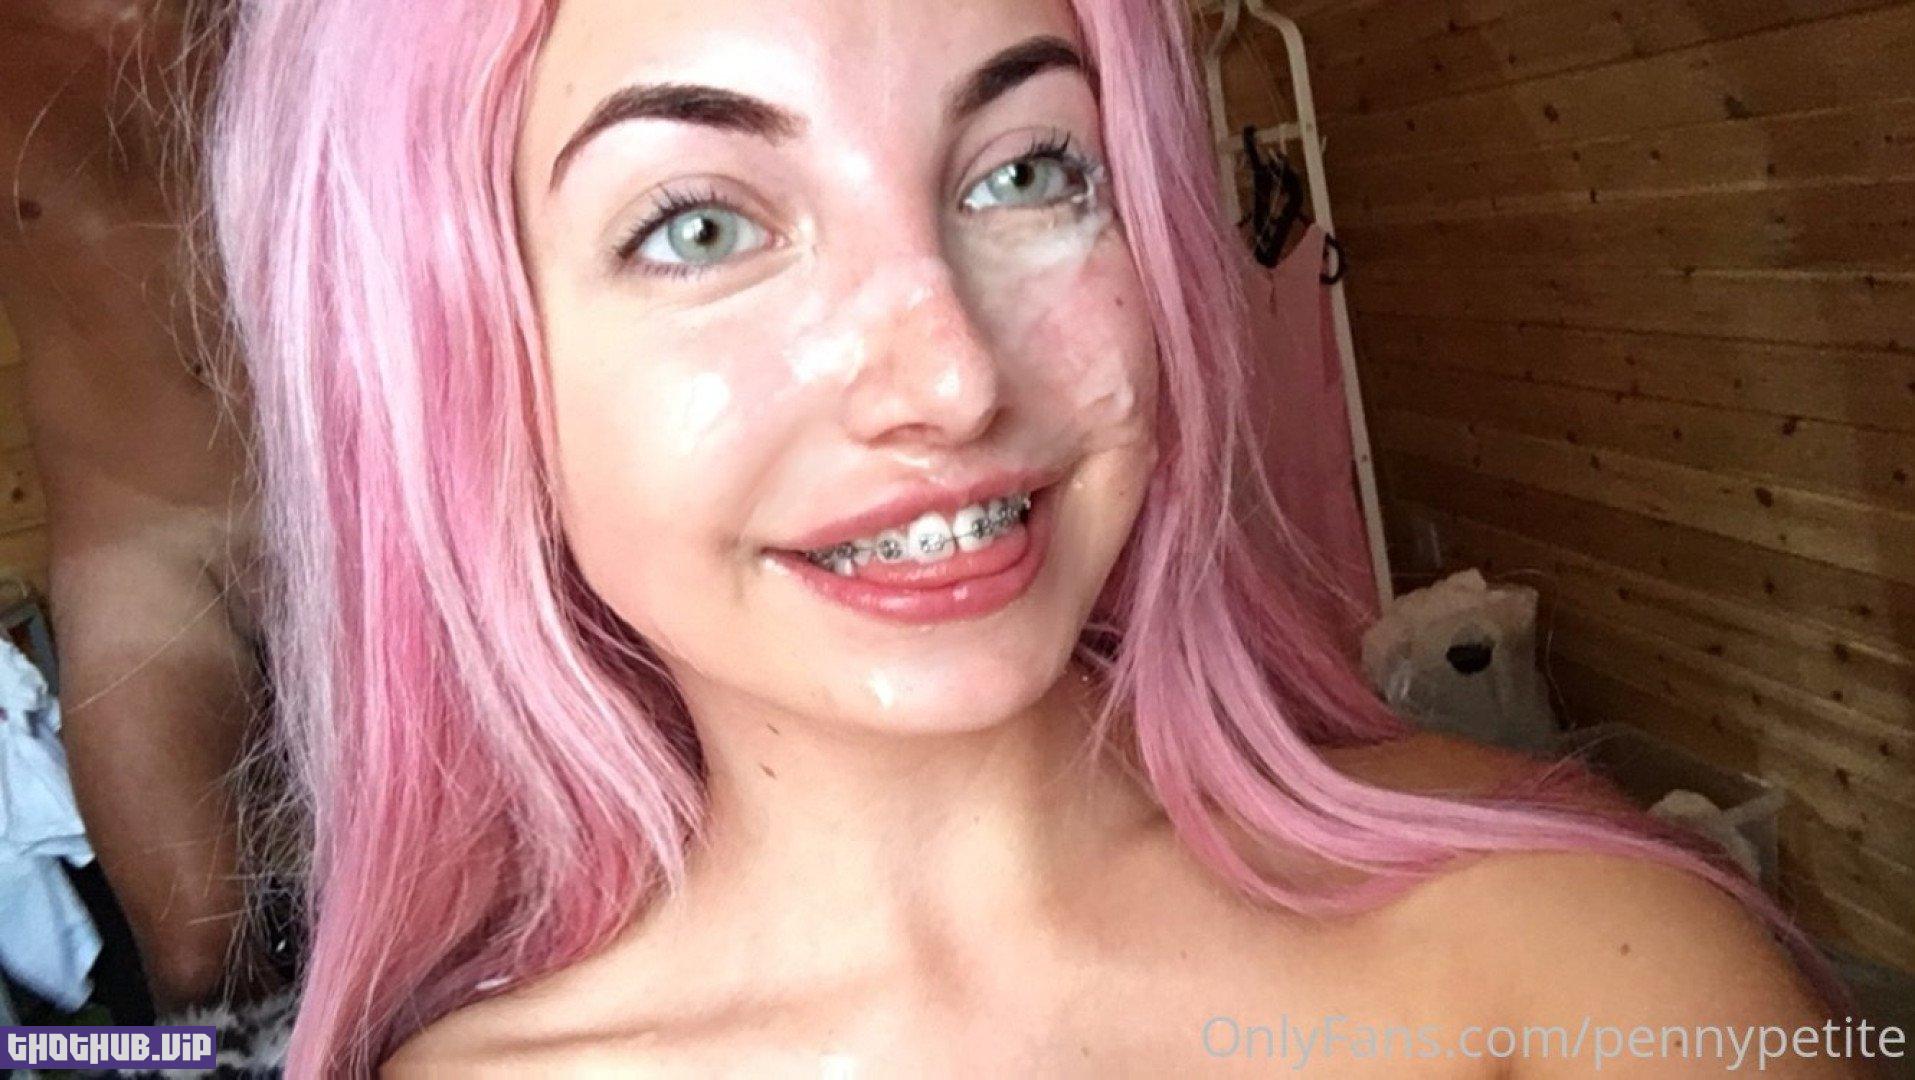  (pennypetite) Onlyfans Leaks (144 images)